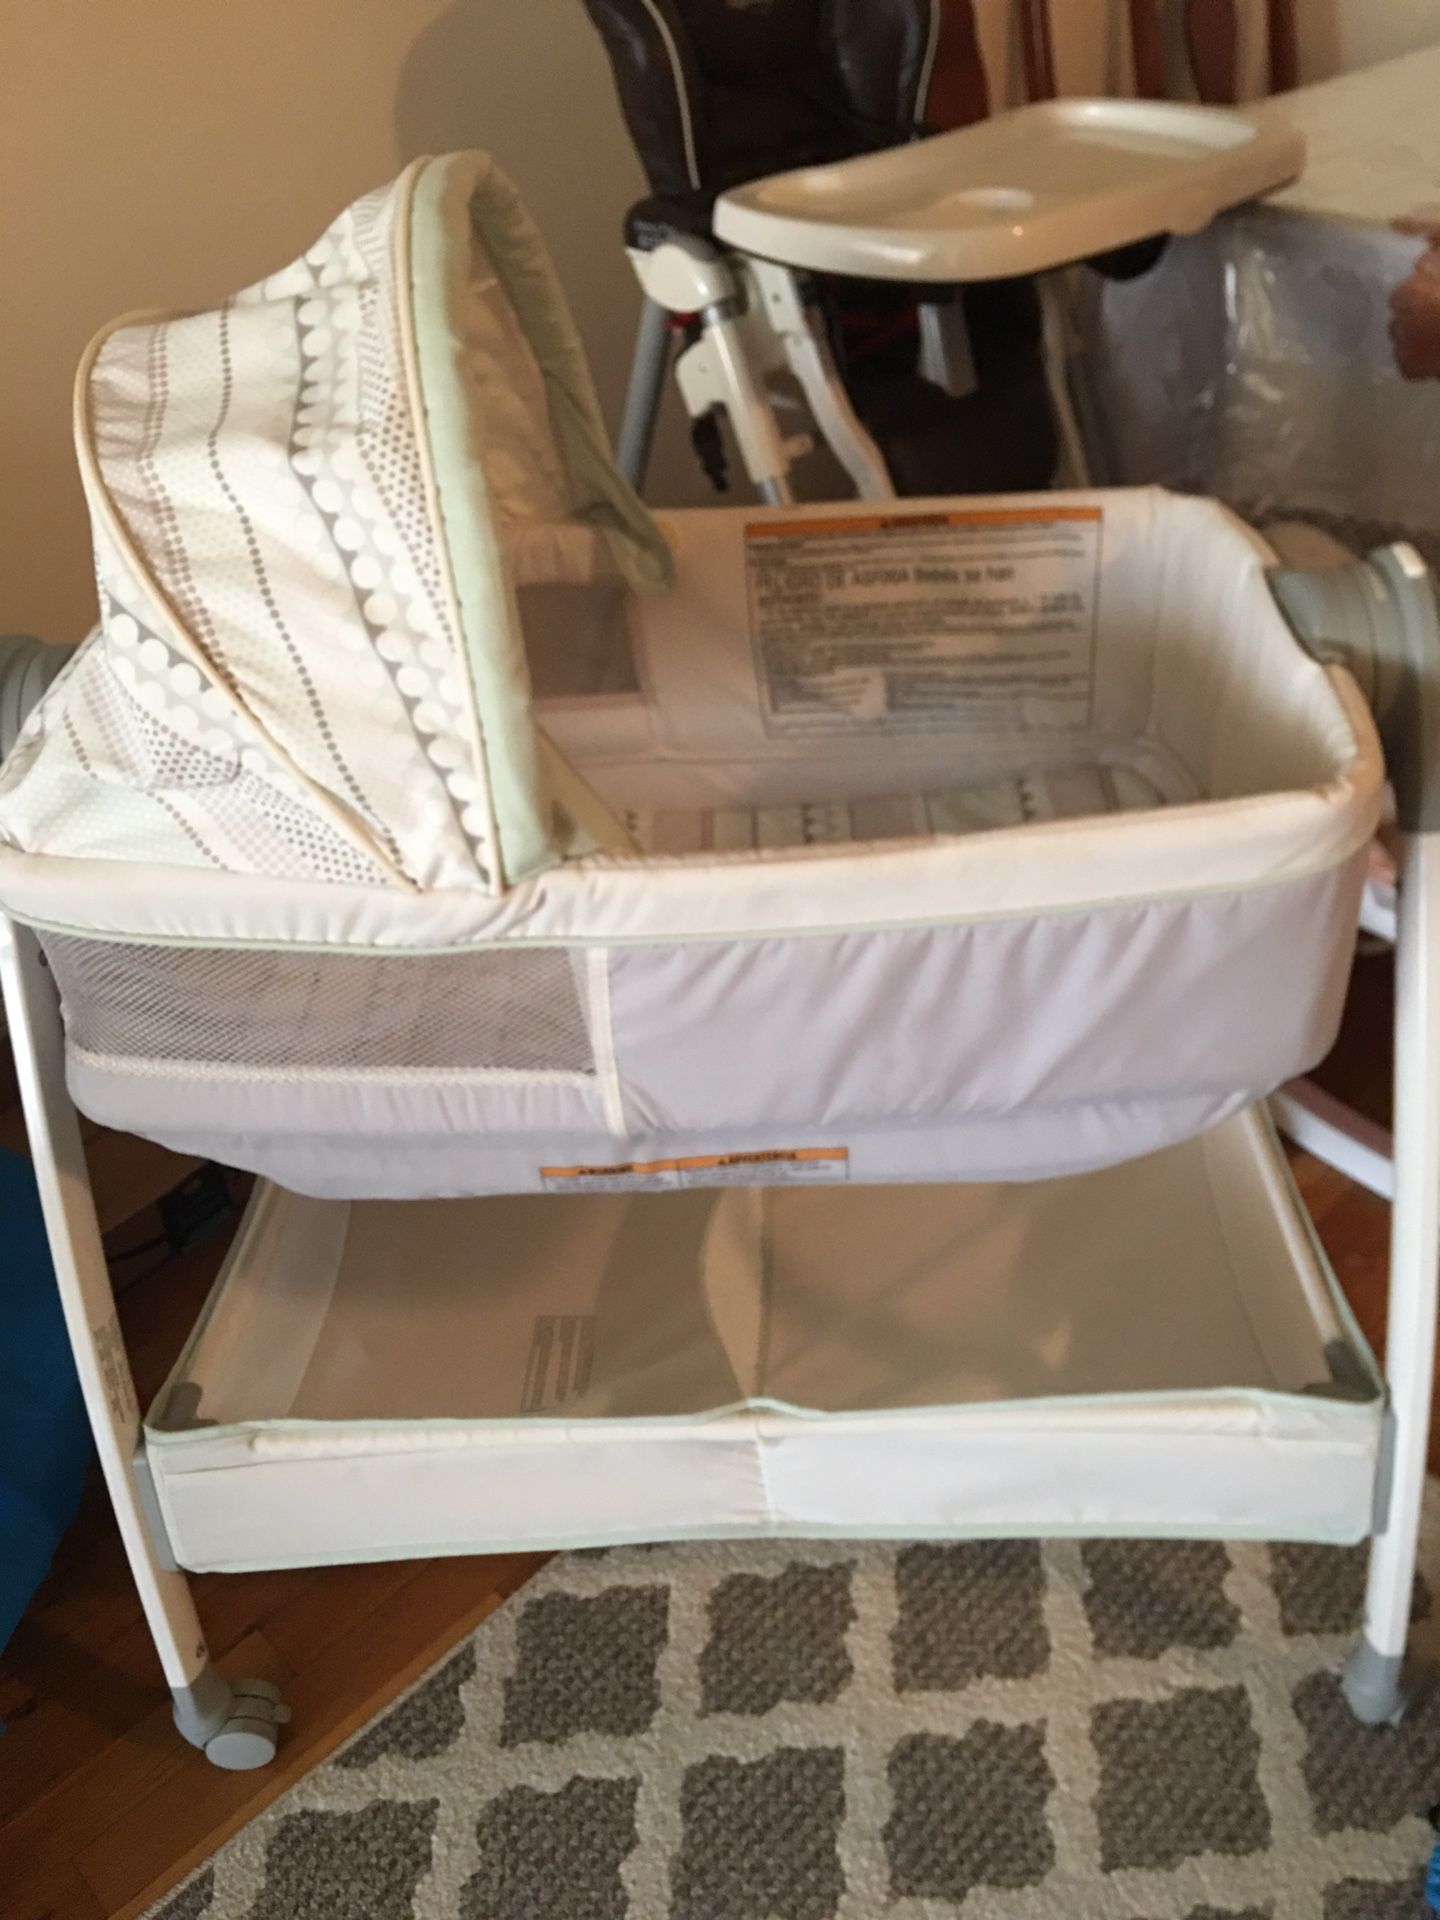 Bassinet turns into Changing table.